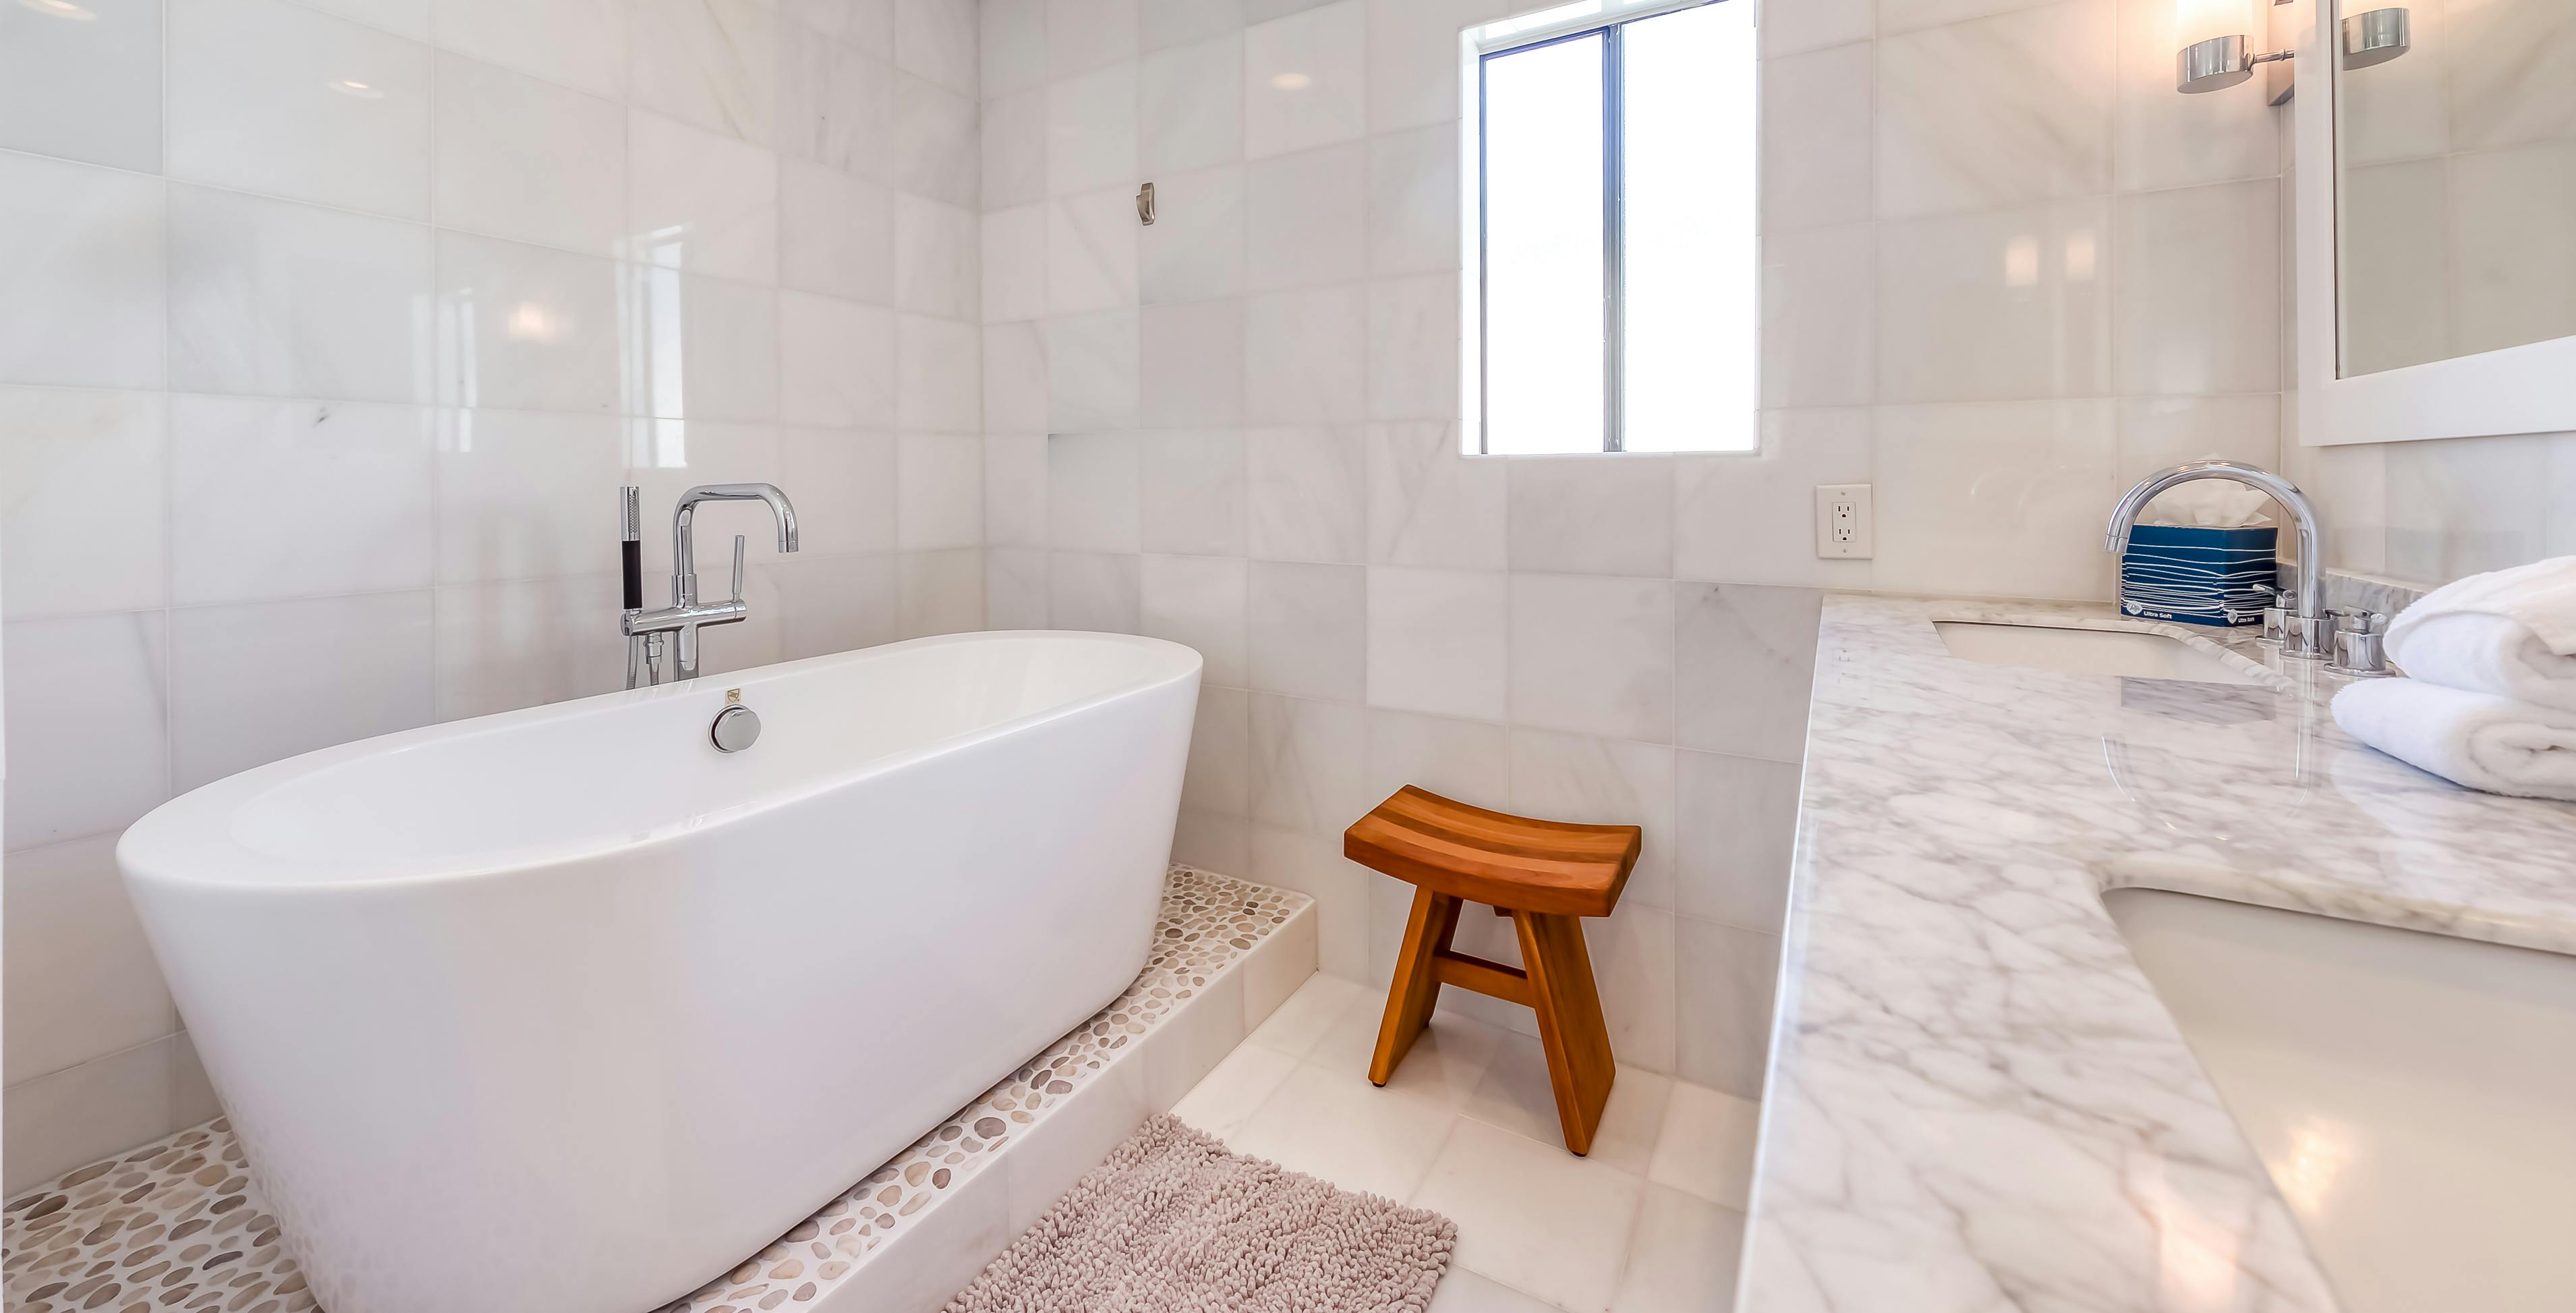 Inside a modern style bathroom of a vacation home with a freestanding bathtub in Palm Springs, CA.